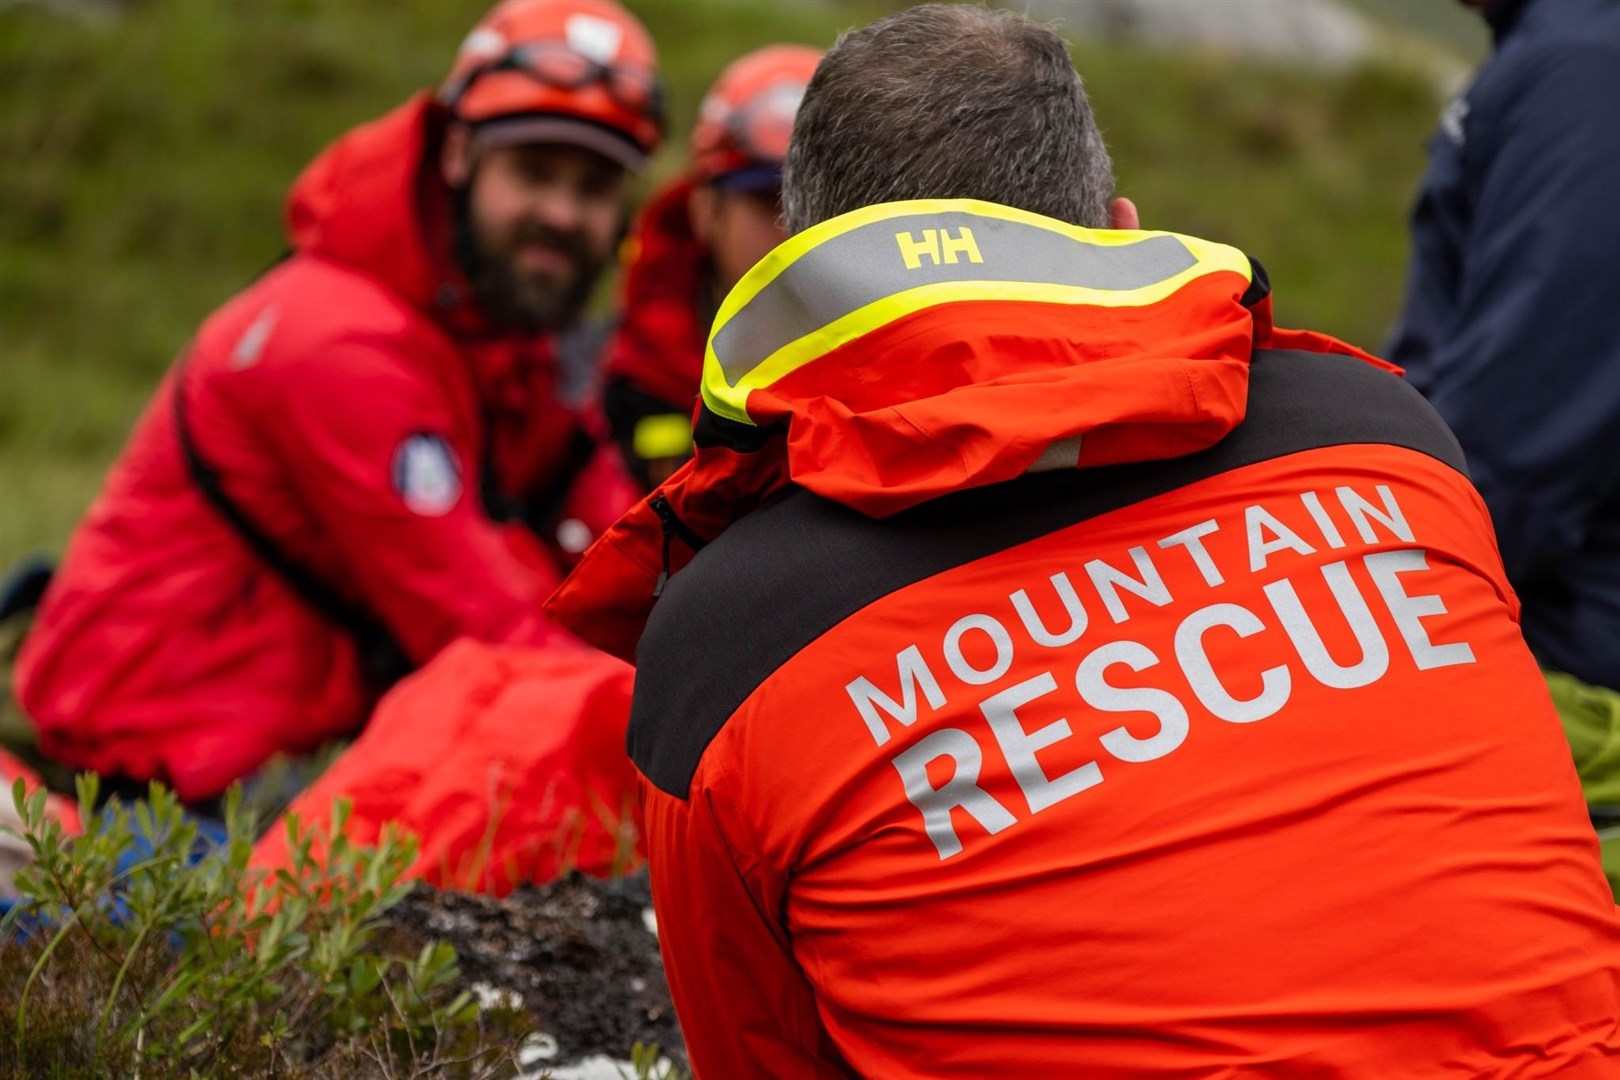 Mountain rescuers test out the new clothing. Picture: Assynt MRT